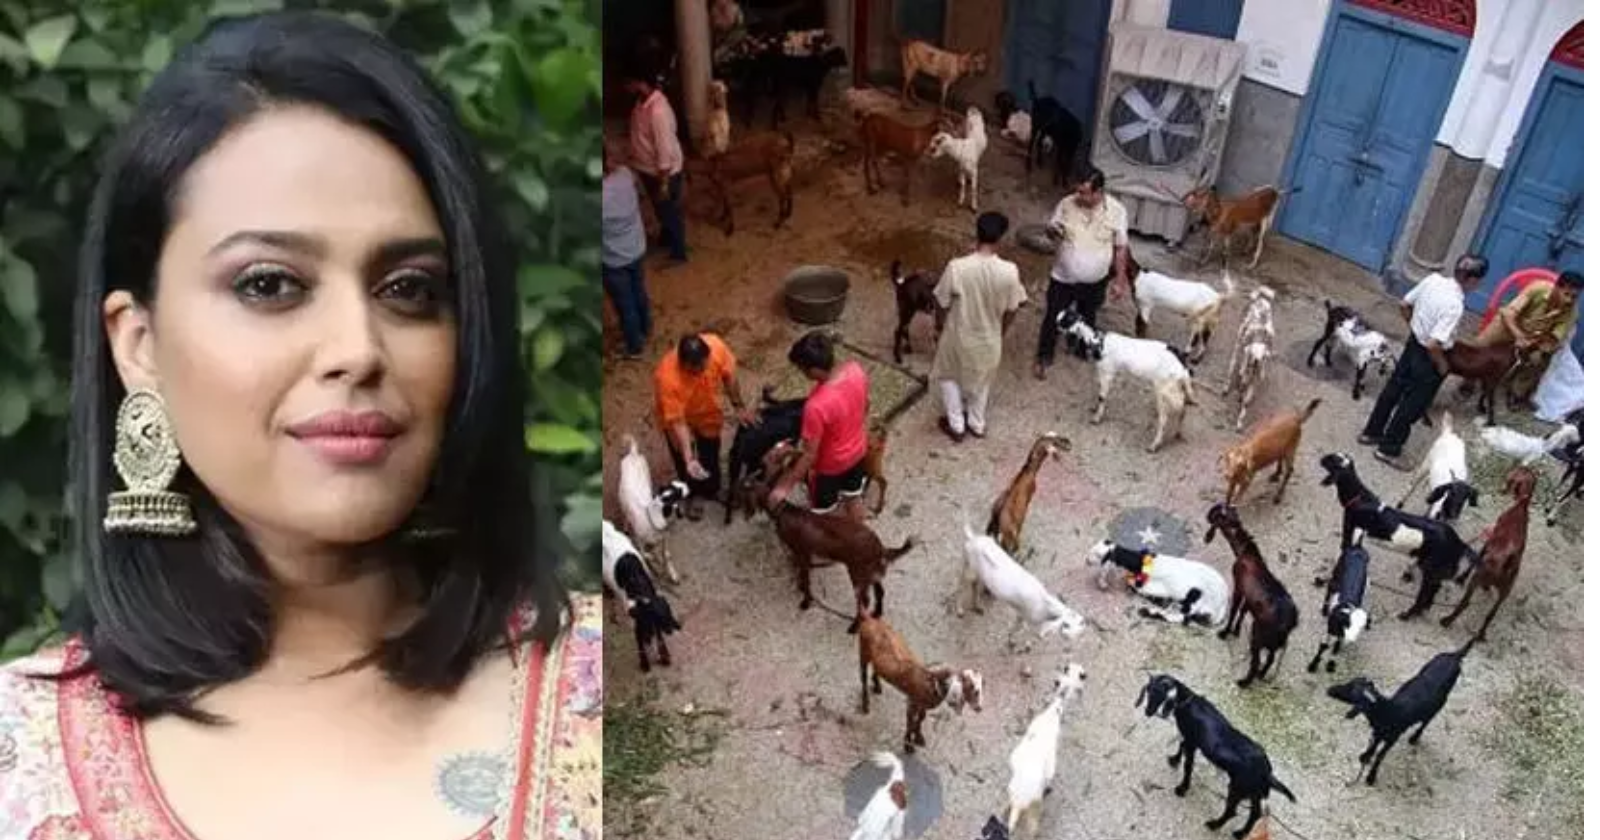 Swara Bhasker Criticizes Jains Who Disguised Themselves as Muslims to